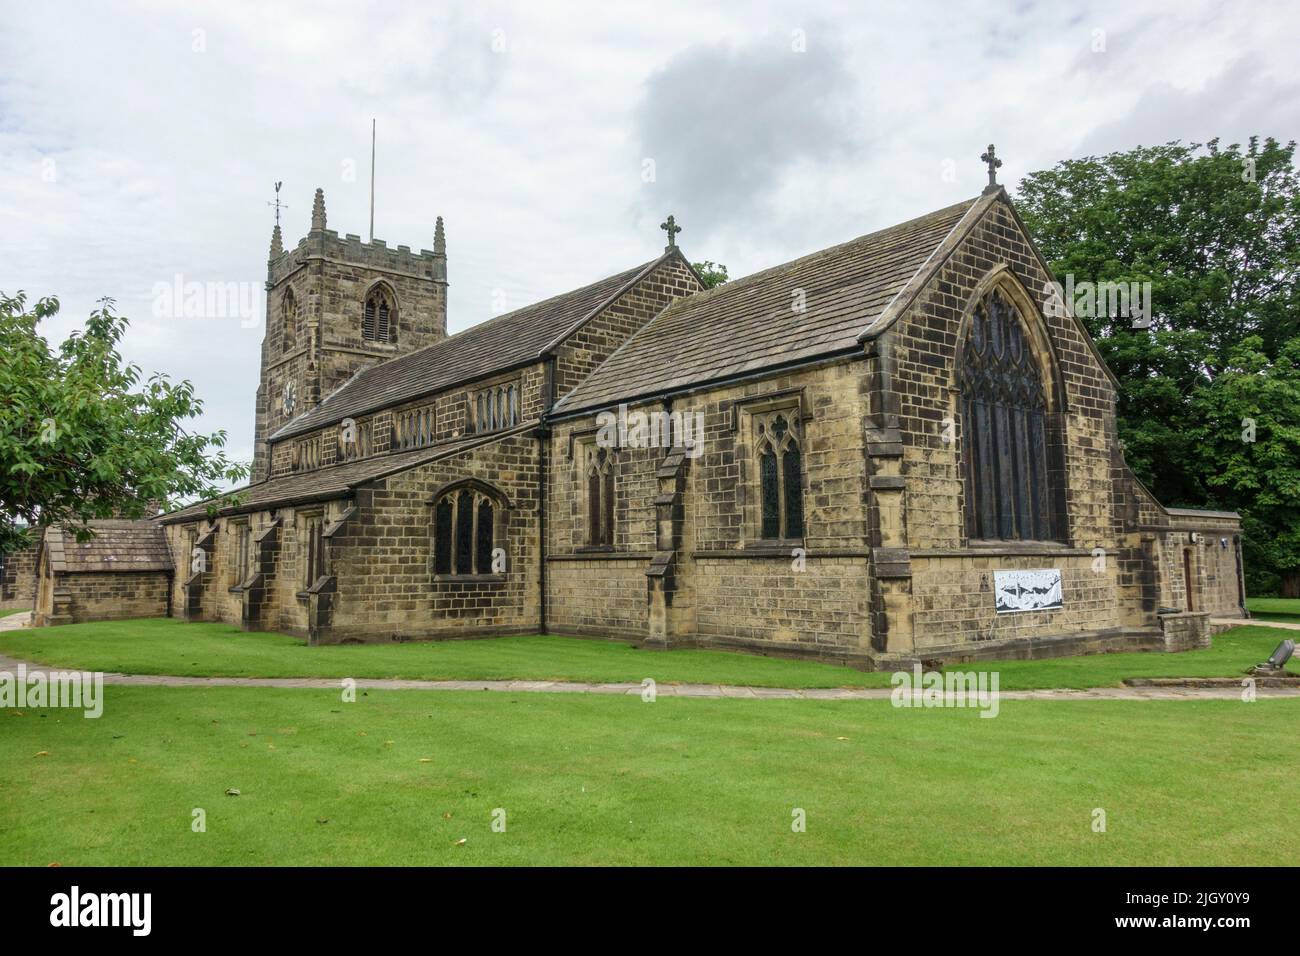 All Saints' Parish Church, in Ilkley, a spa town and civil parish in the City of Bradford in West Yorkshire, UK. Stock Photo